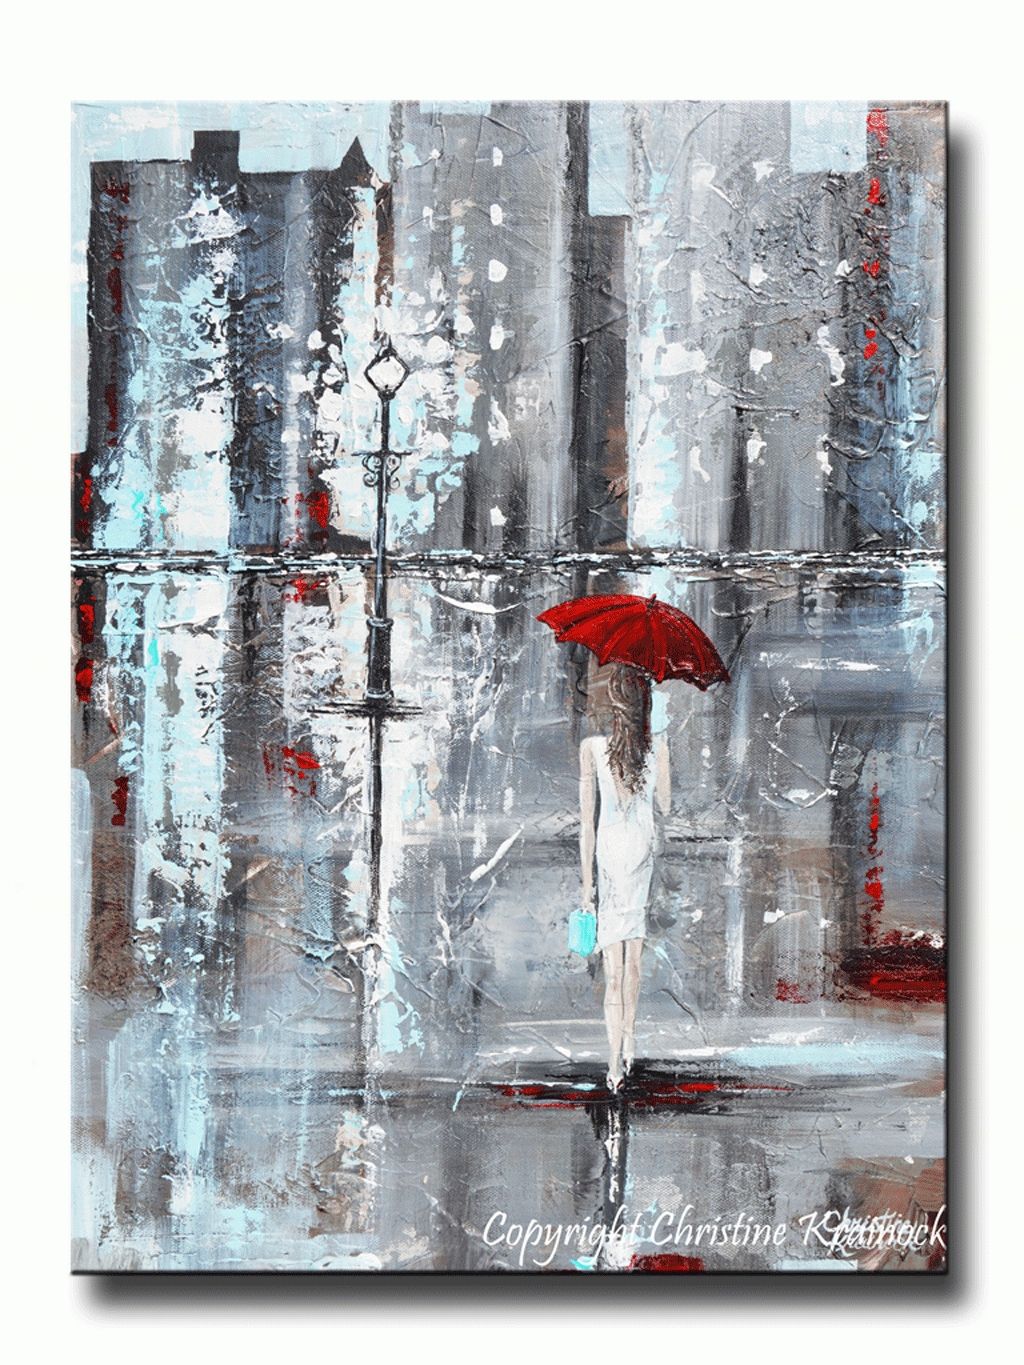 Giclee Print Art Abstract Painting Girl Red Umbrella City Modern Throughout Most Recent Port Elizabeth Canvas Wall Art (View 1 of 15)